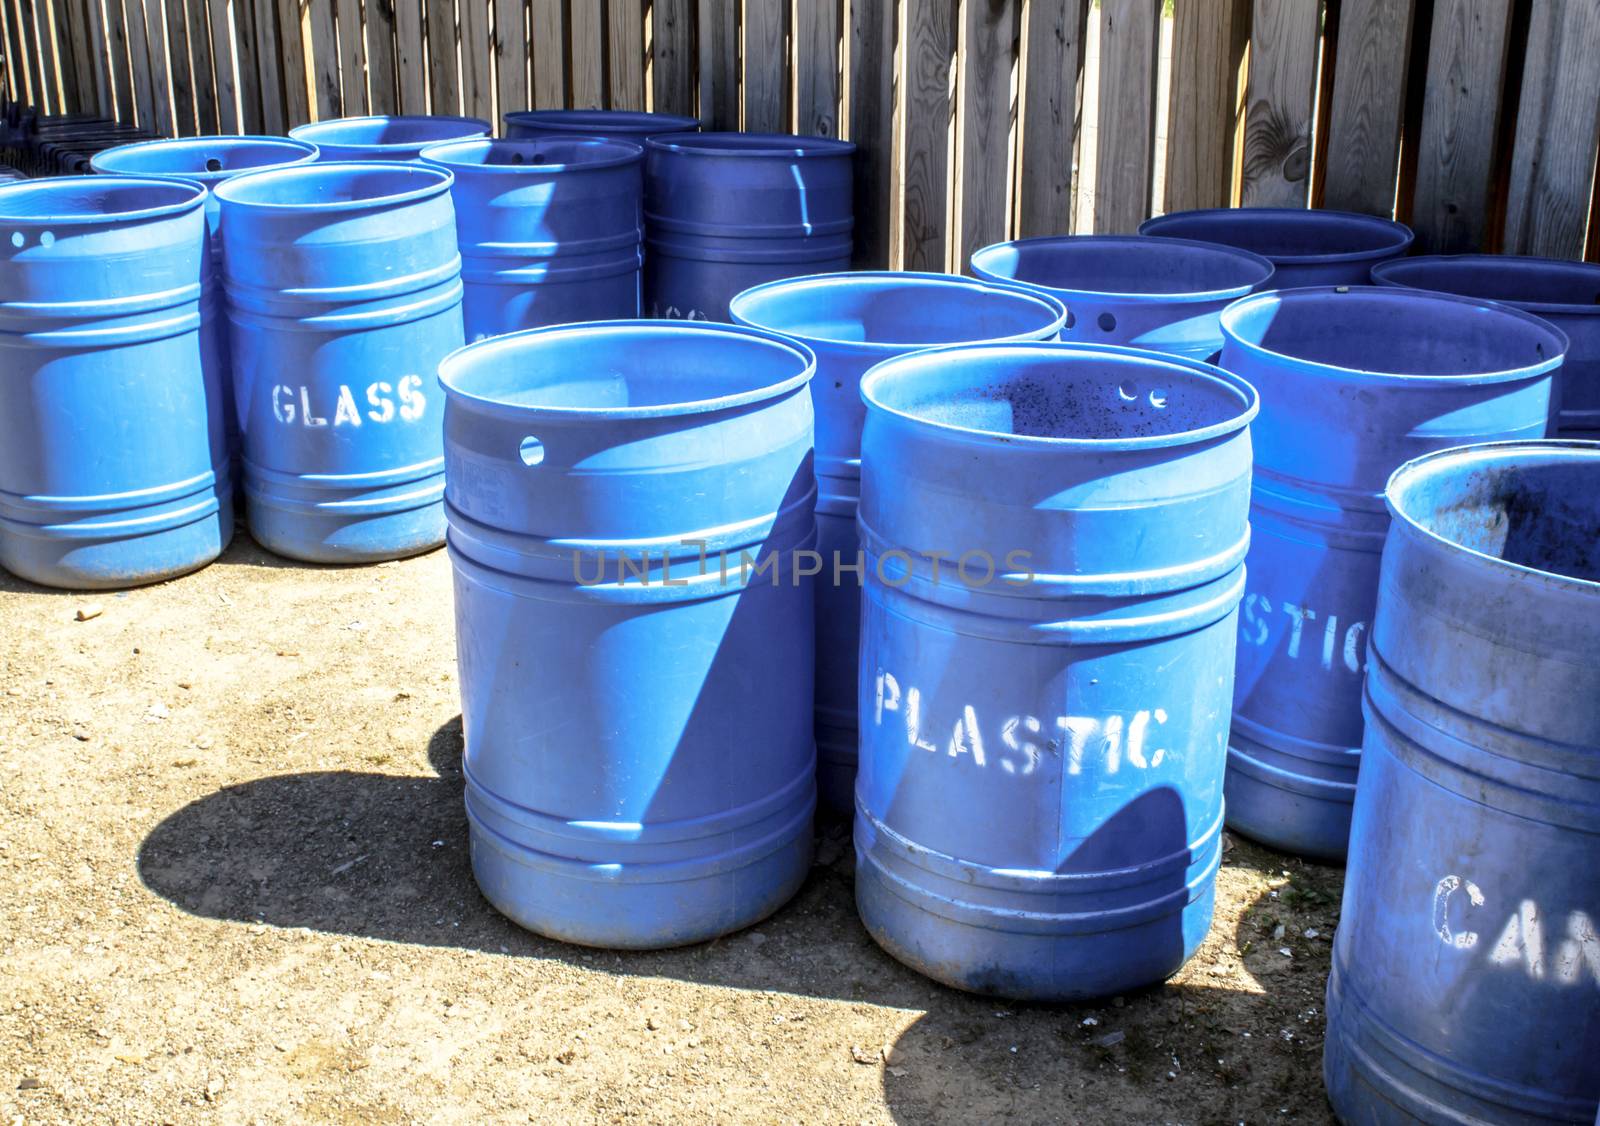 Many blue plastic barrels for recycling plastic, cans, and glass. They are inside a fenced area at a camping ground. 